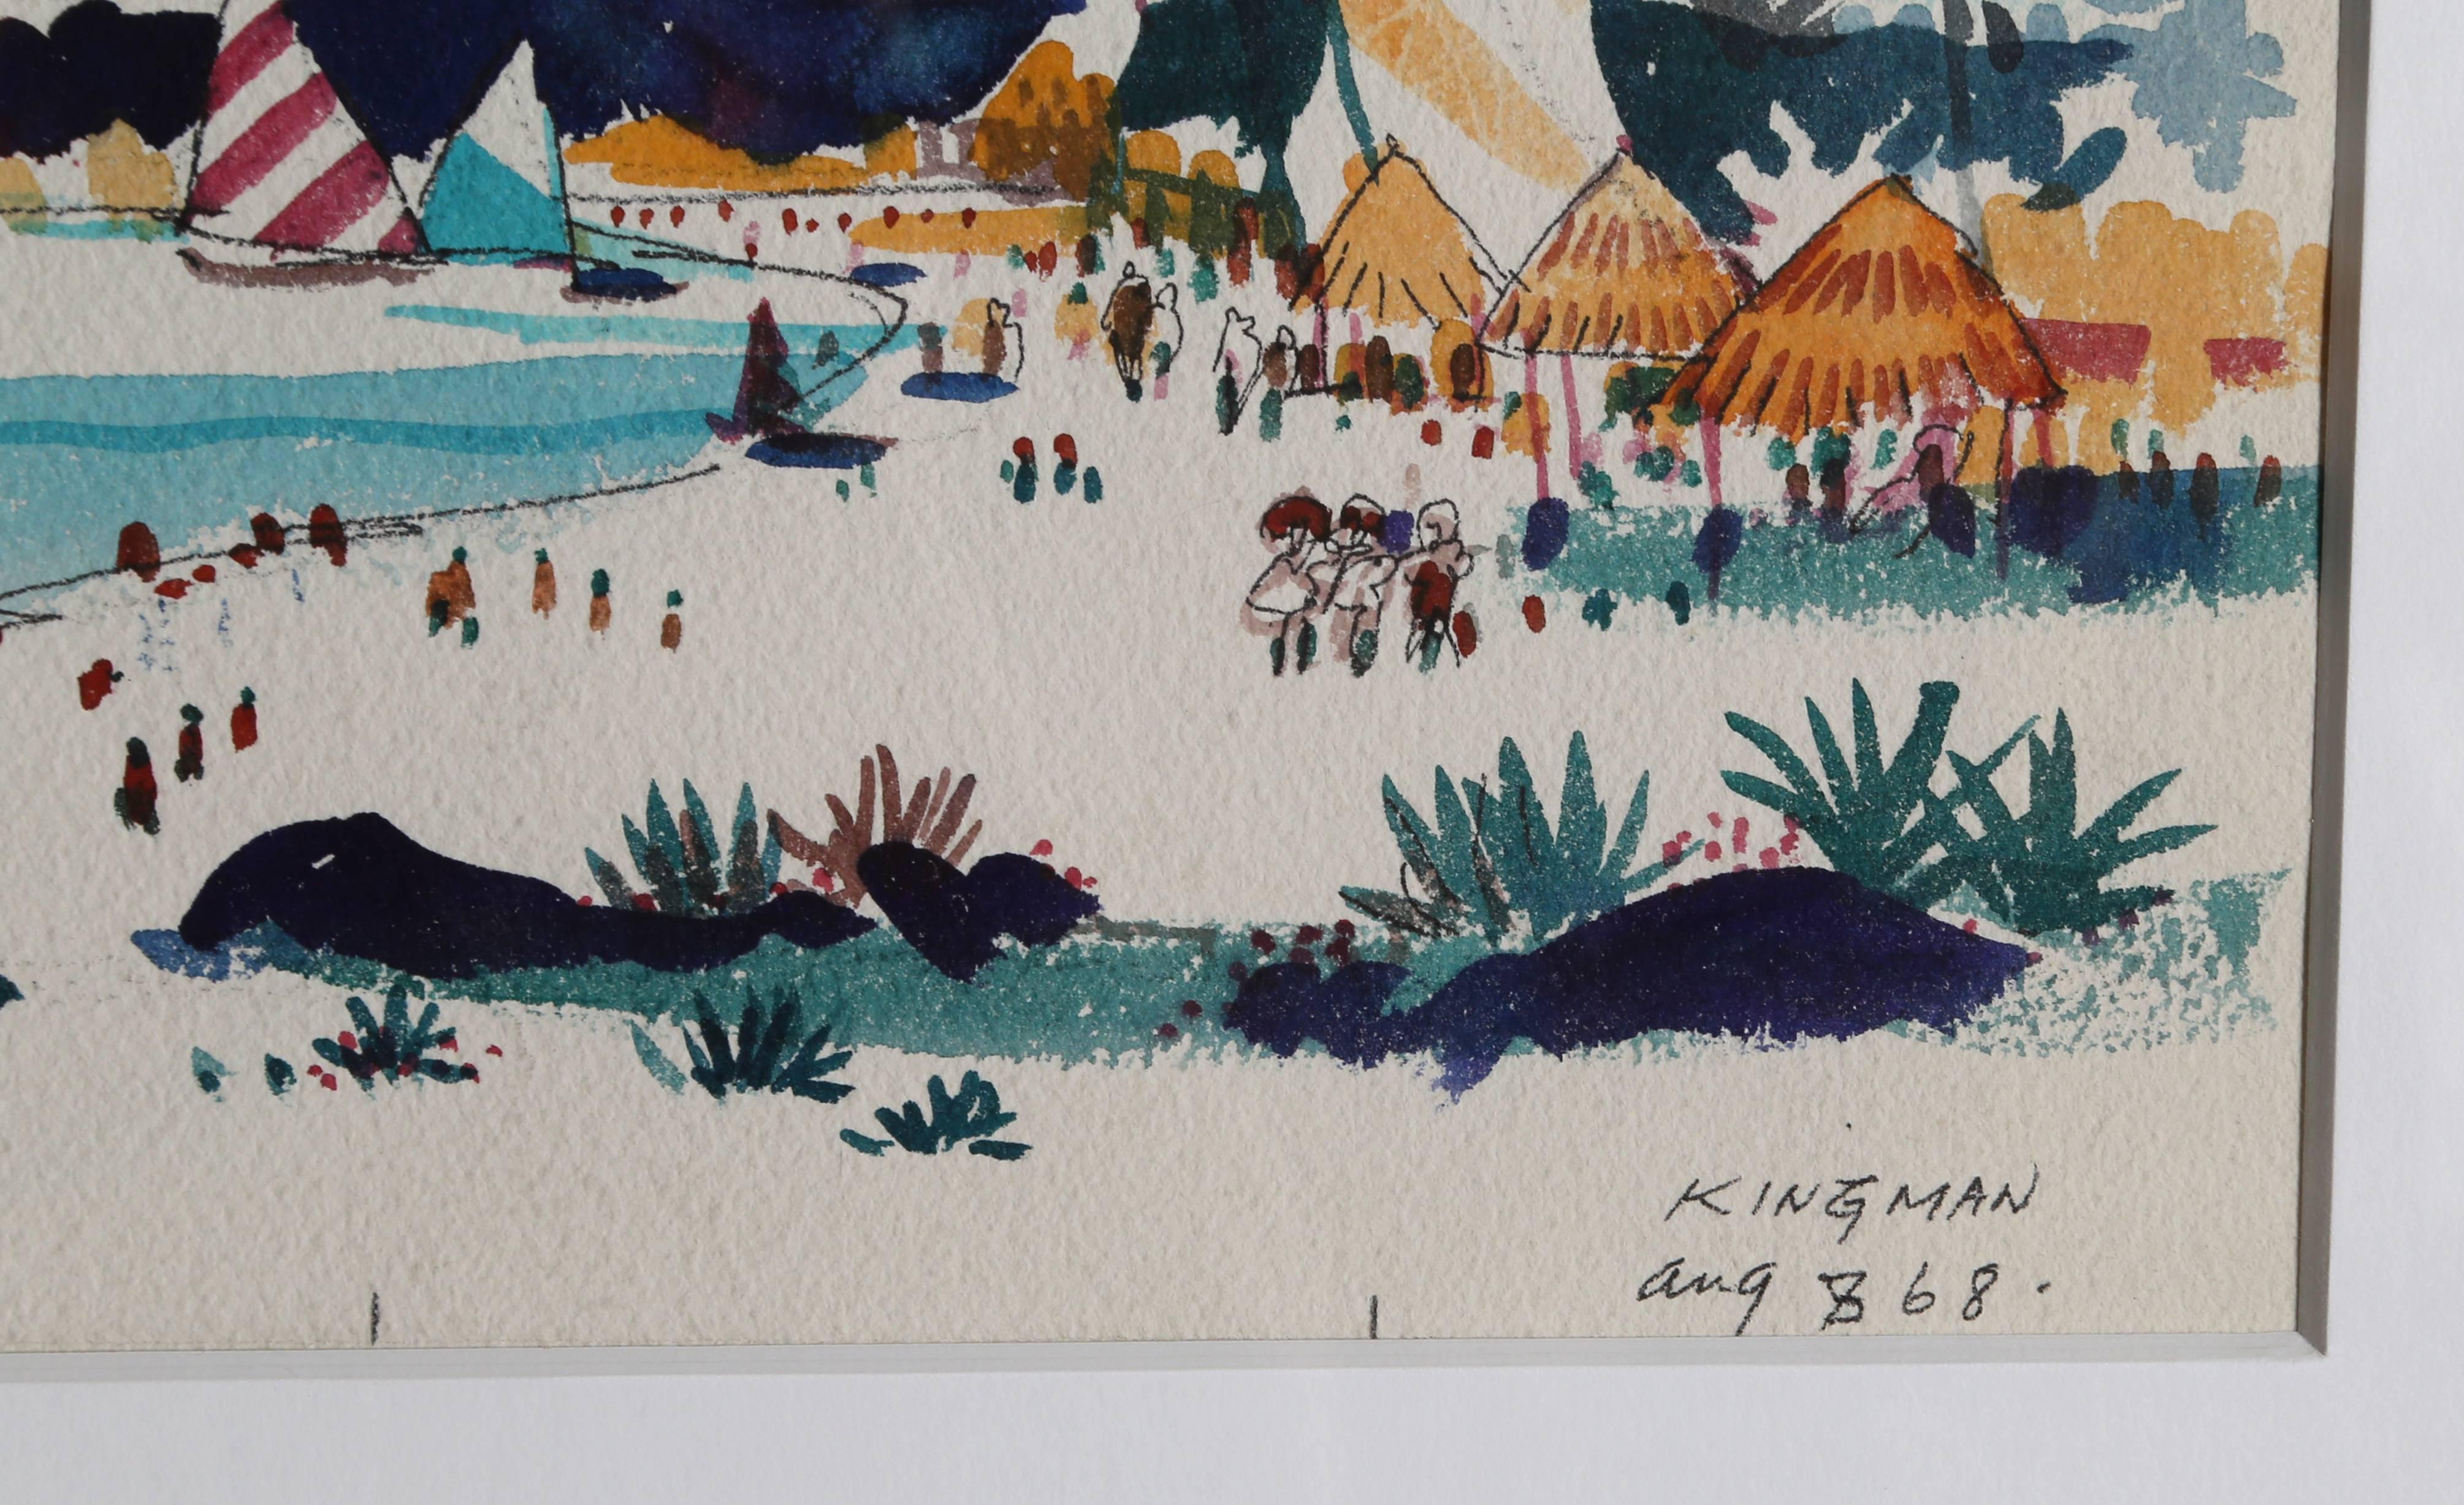 Artist:	Dong Moy Chu Kingman, Chinese/American (1911 - 2000)
Title:	Acapulco Beach Scene I
Year:	1968
Medium:	Watercolor, signed and dated l.r.
Size:	10.5 x 18 on 13.5 x 20.5 inches
Frame: 17 x 26 inches